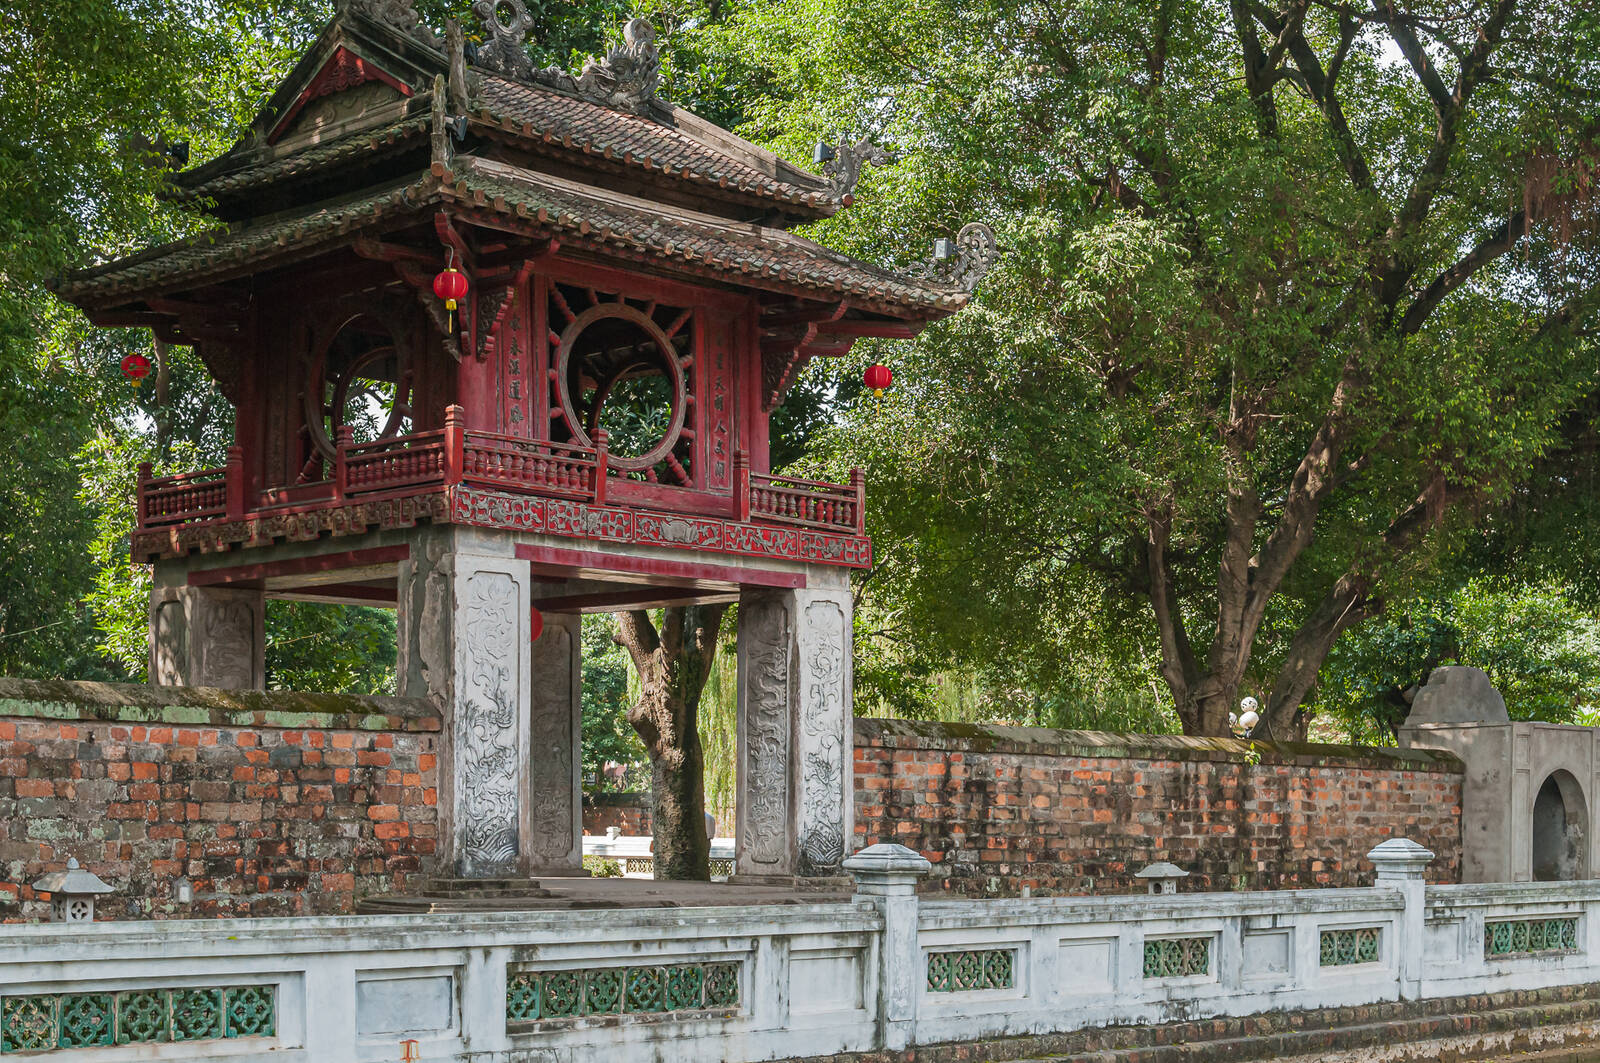 Image of Temple of Literature by Sue Wolfe